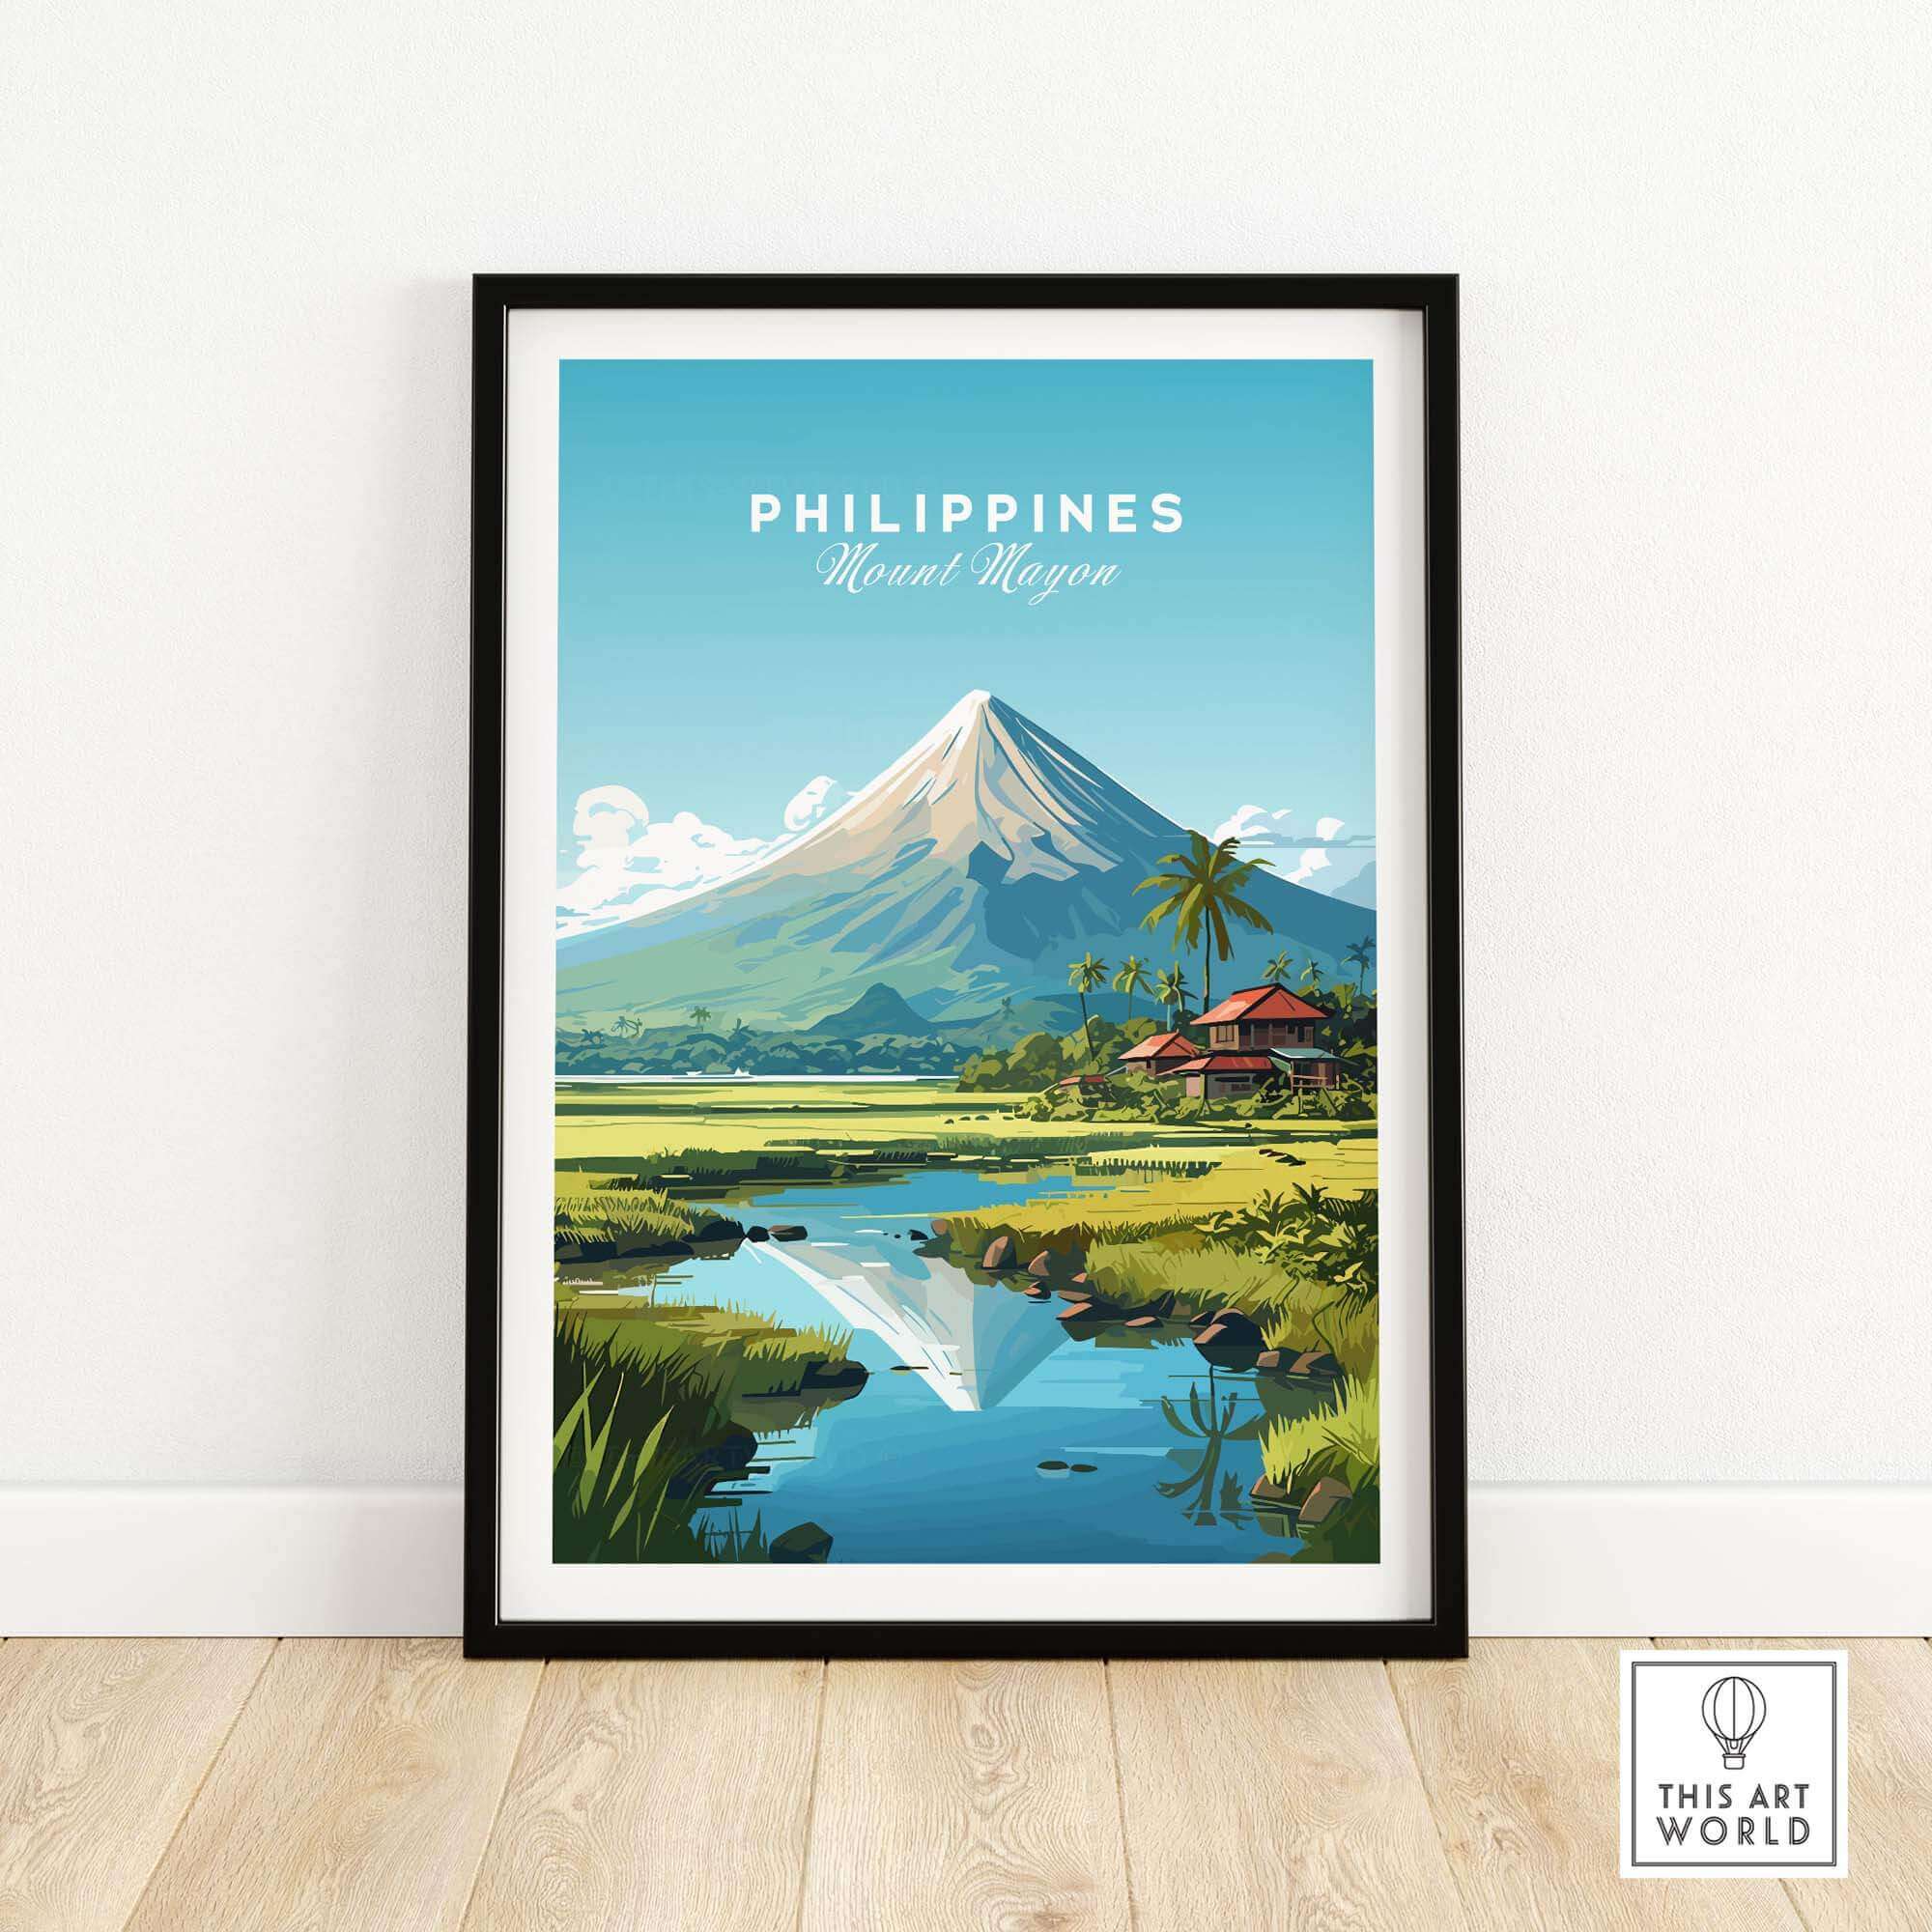 Travel poster of Mount Mayon in the Philippines with blue sky and tropical landscapes. The poster is shown framed in a black wooden frame resting on a natural wooden floor and leaning against a white wall. 